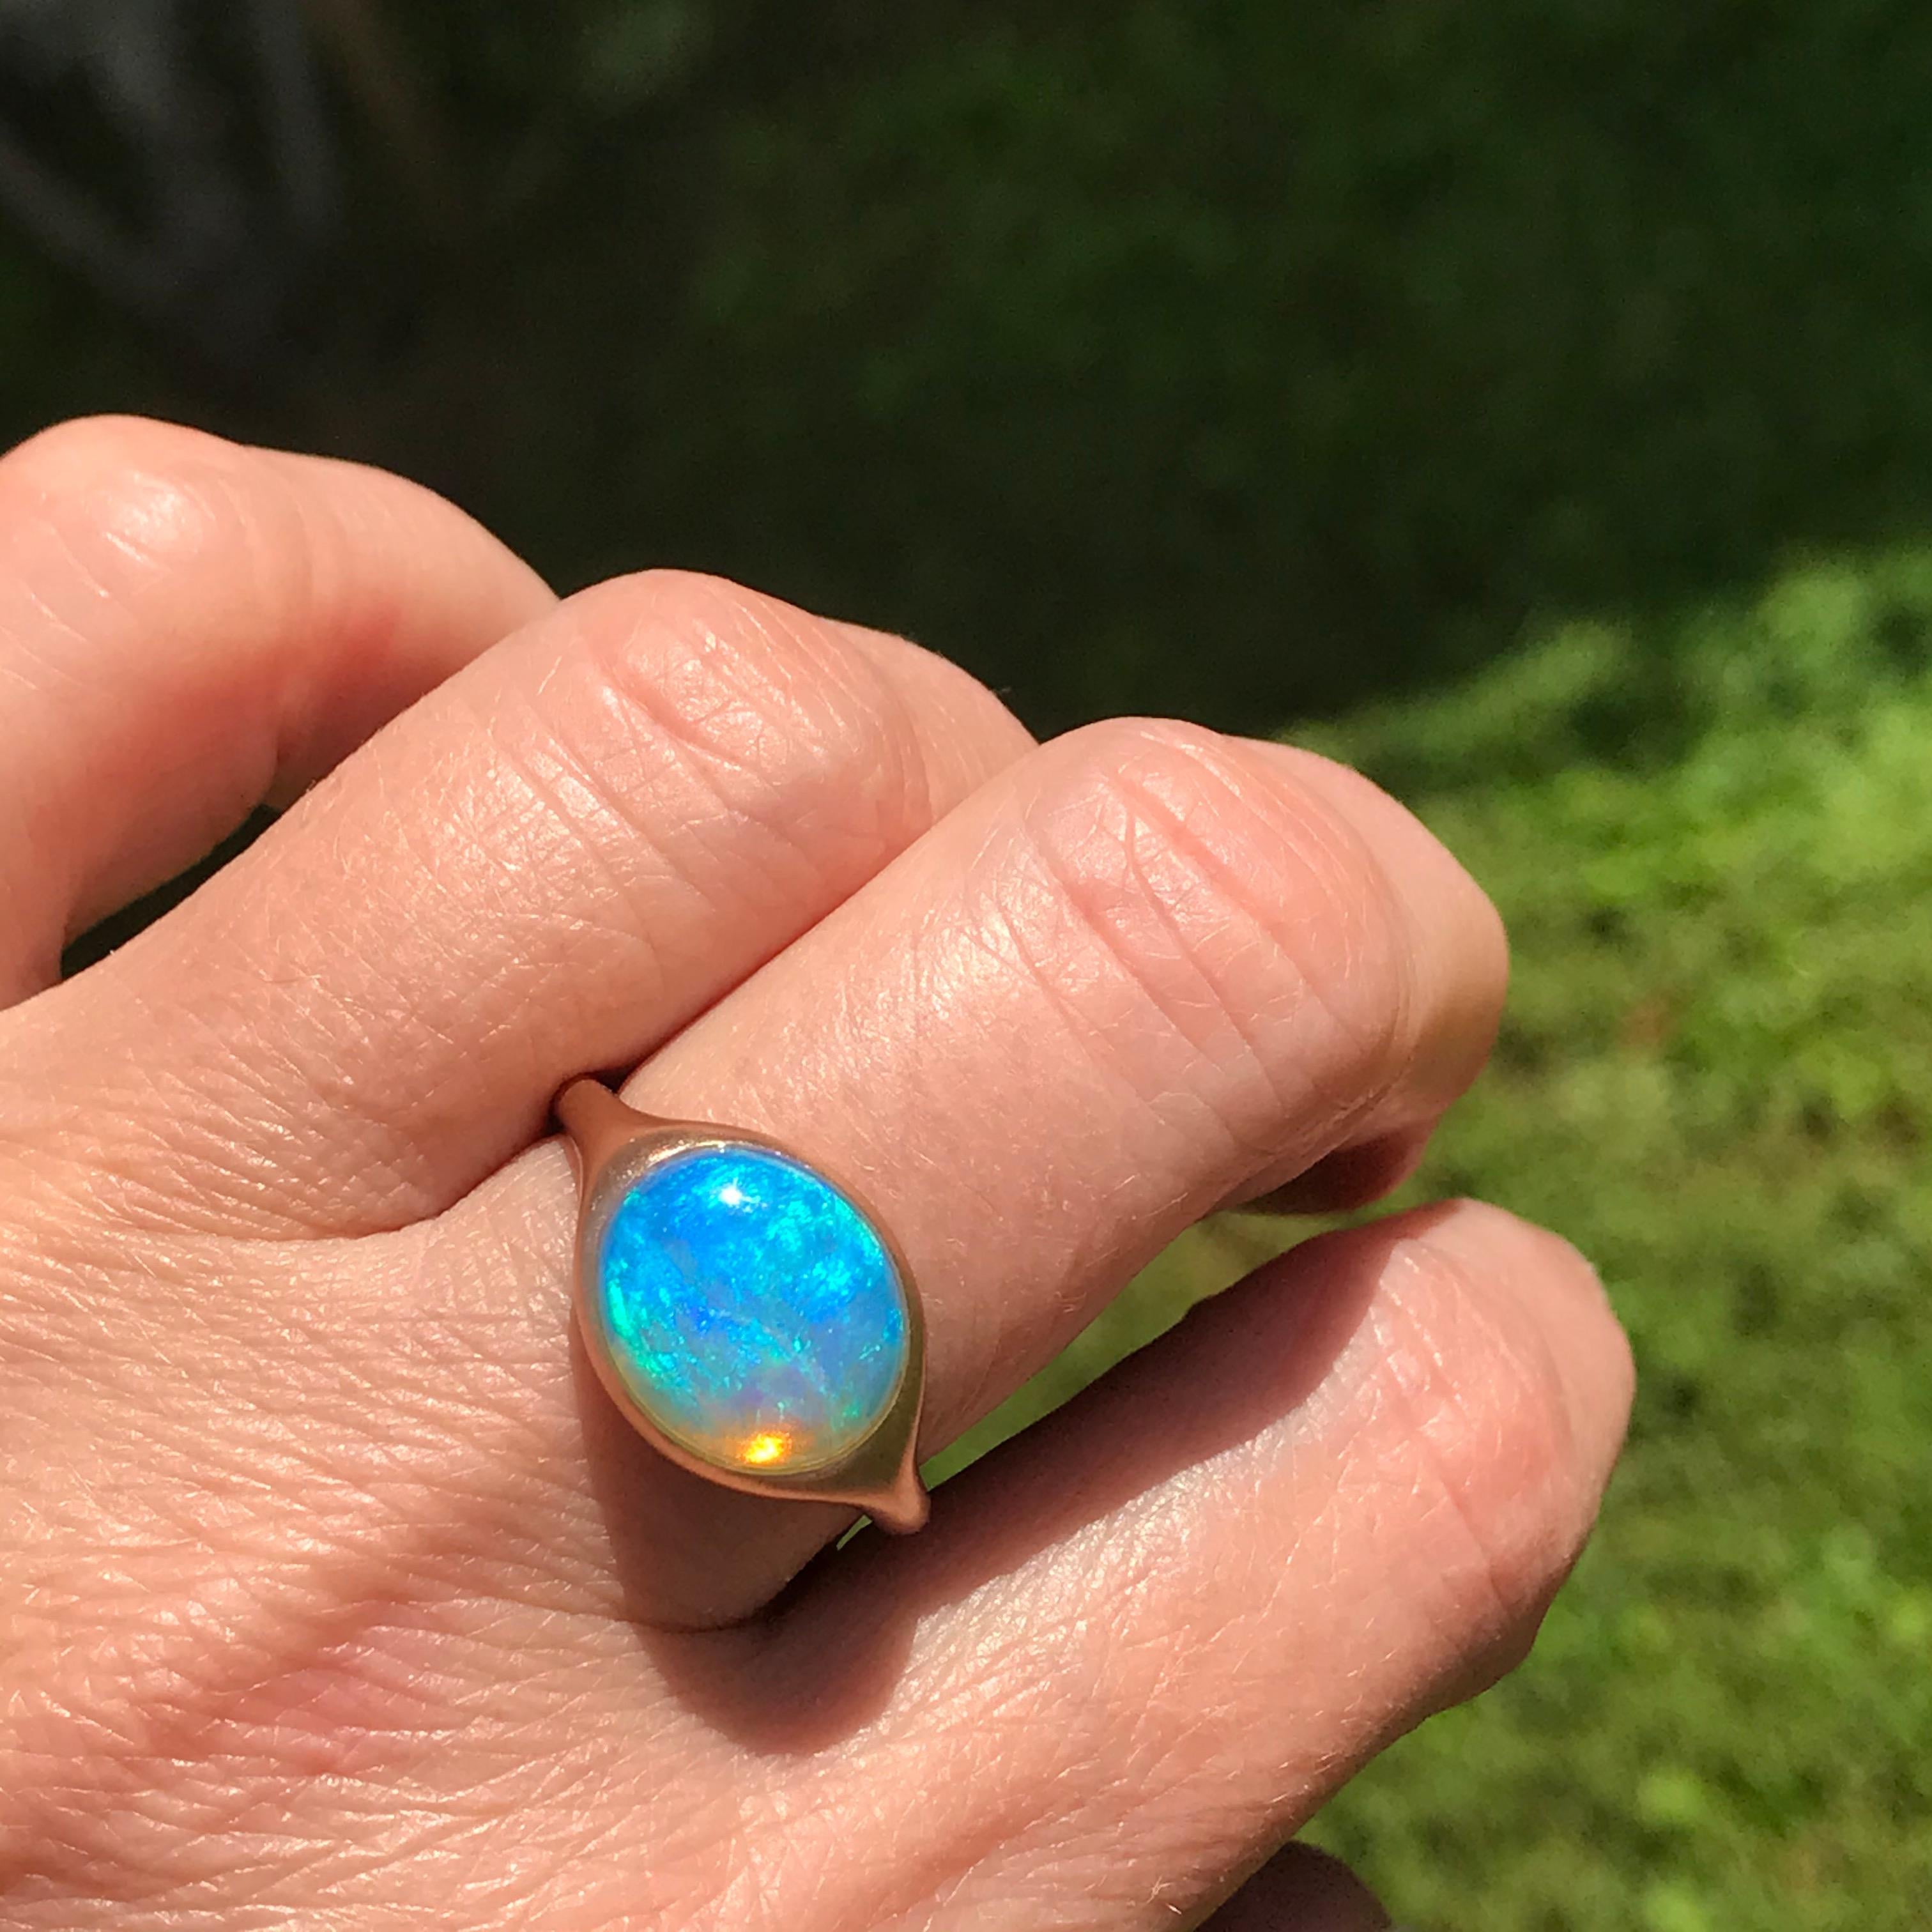 Dalben design One of a kind 18 kt rose gold matte finishing ring with a 4,32 carat bezel-set  oval deep light blue lovely Australian Opal  .  
Ring size 7 1/4 - EU 55 re-sizable to most finger sizes.  
Bezel setting dimension:  
max width 15 mm, 